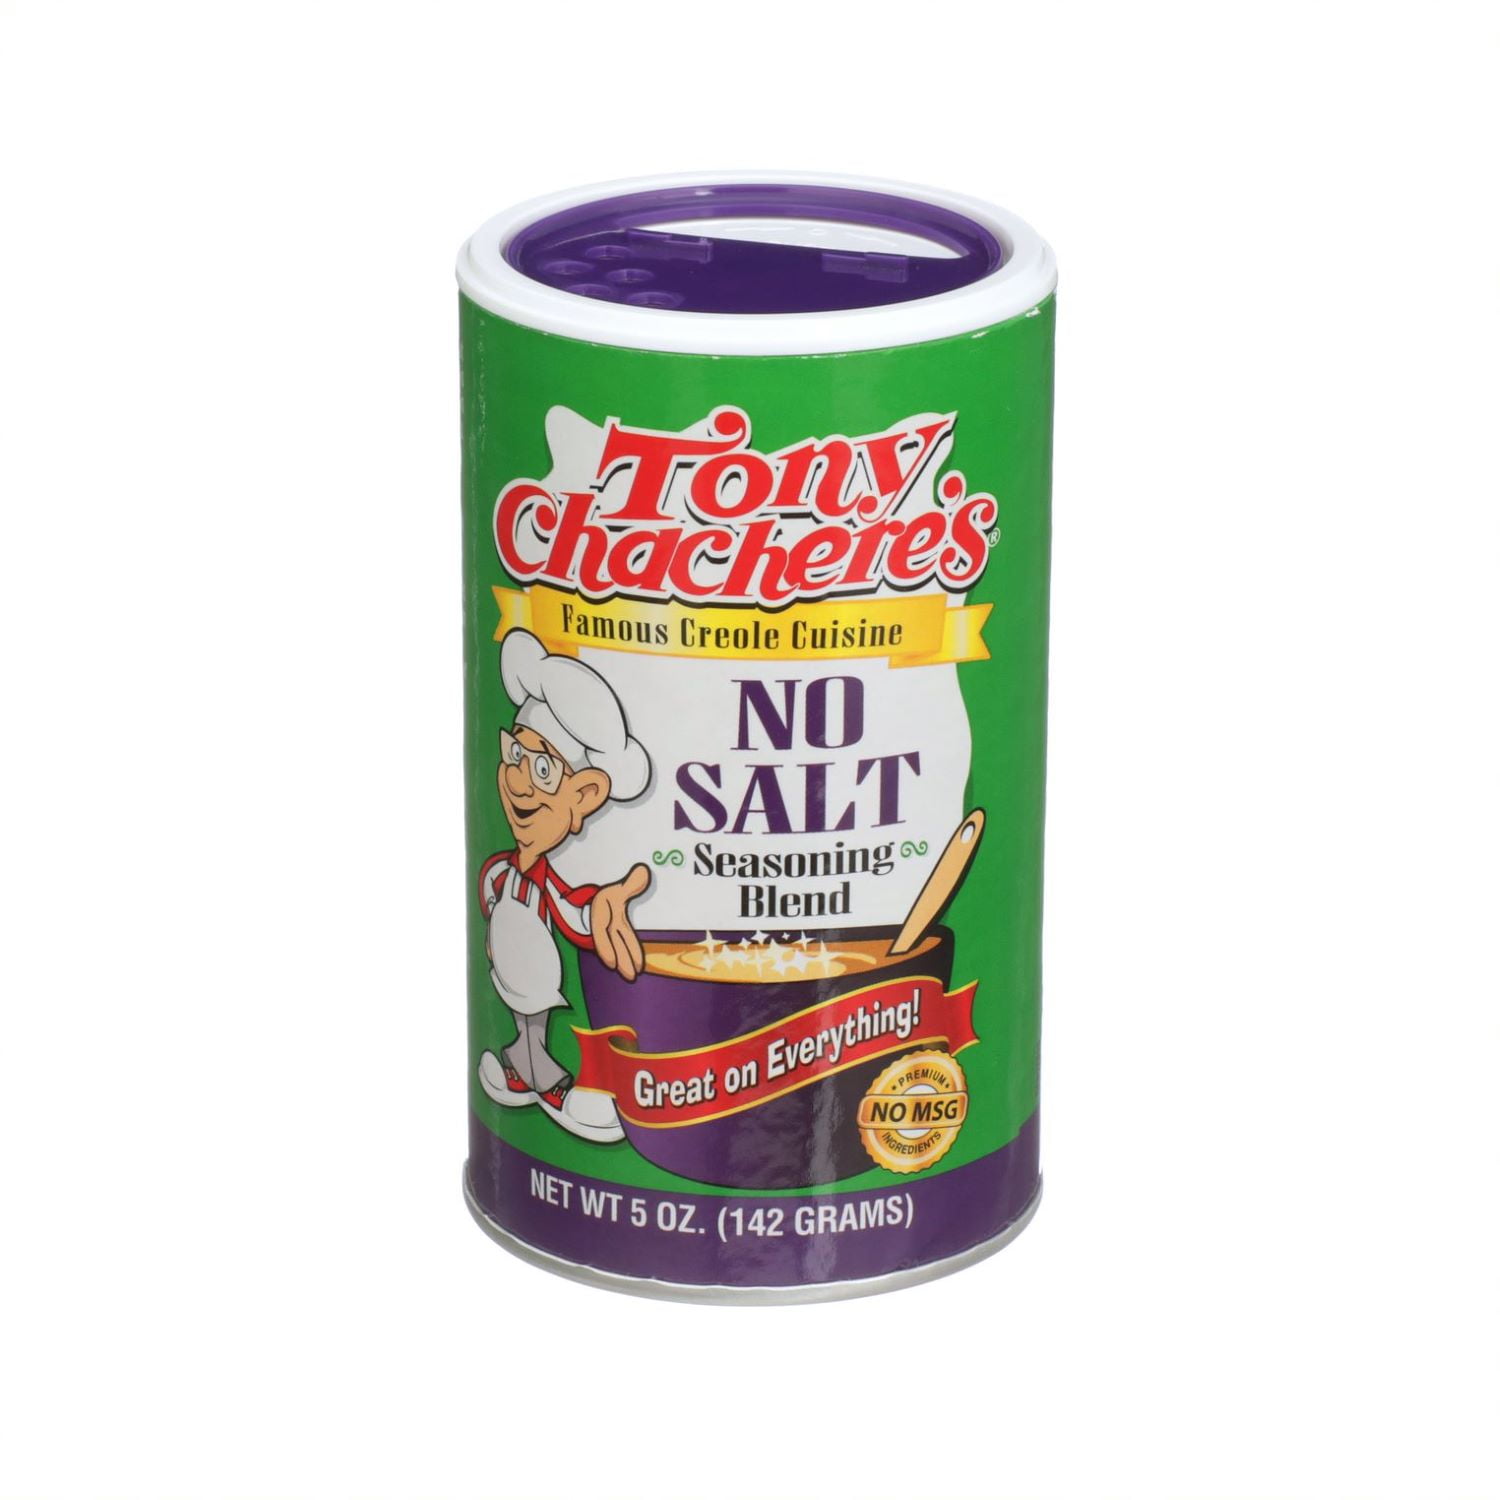 Tony Chachere's Salt Free Cajun Seasoning and Chef Paul Salt Free Seasoning  - MYGORP Bundle For Sodium Free Cajun Seasoning And No Salt Seasonings And  Spices (2 Items)